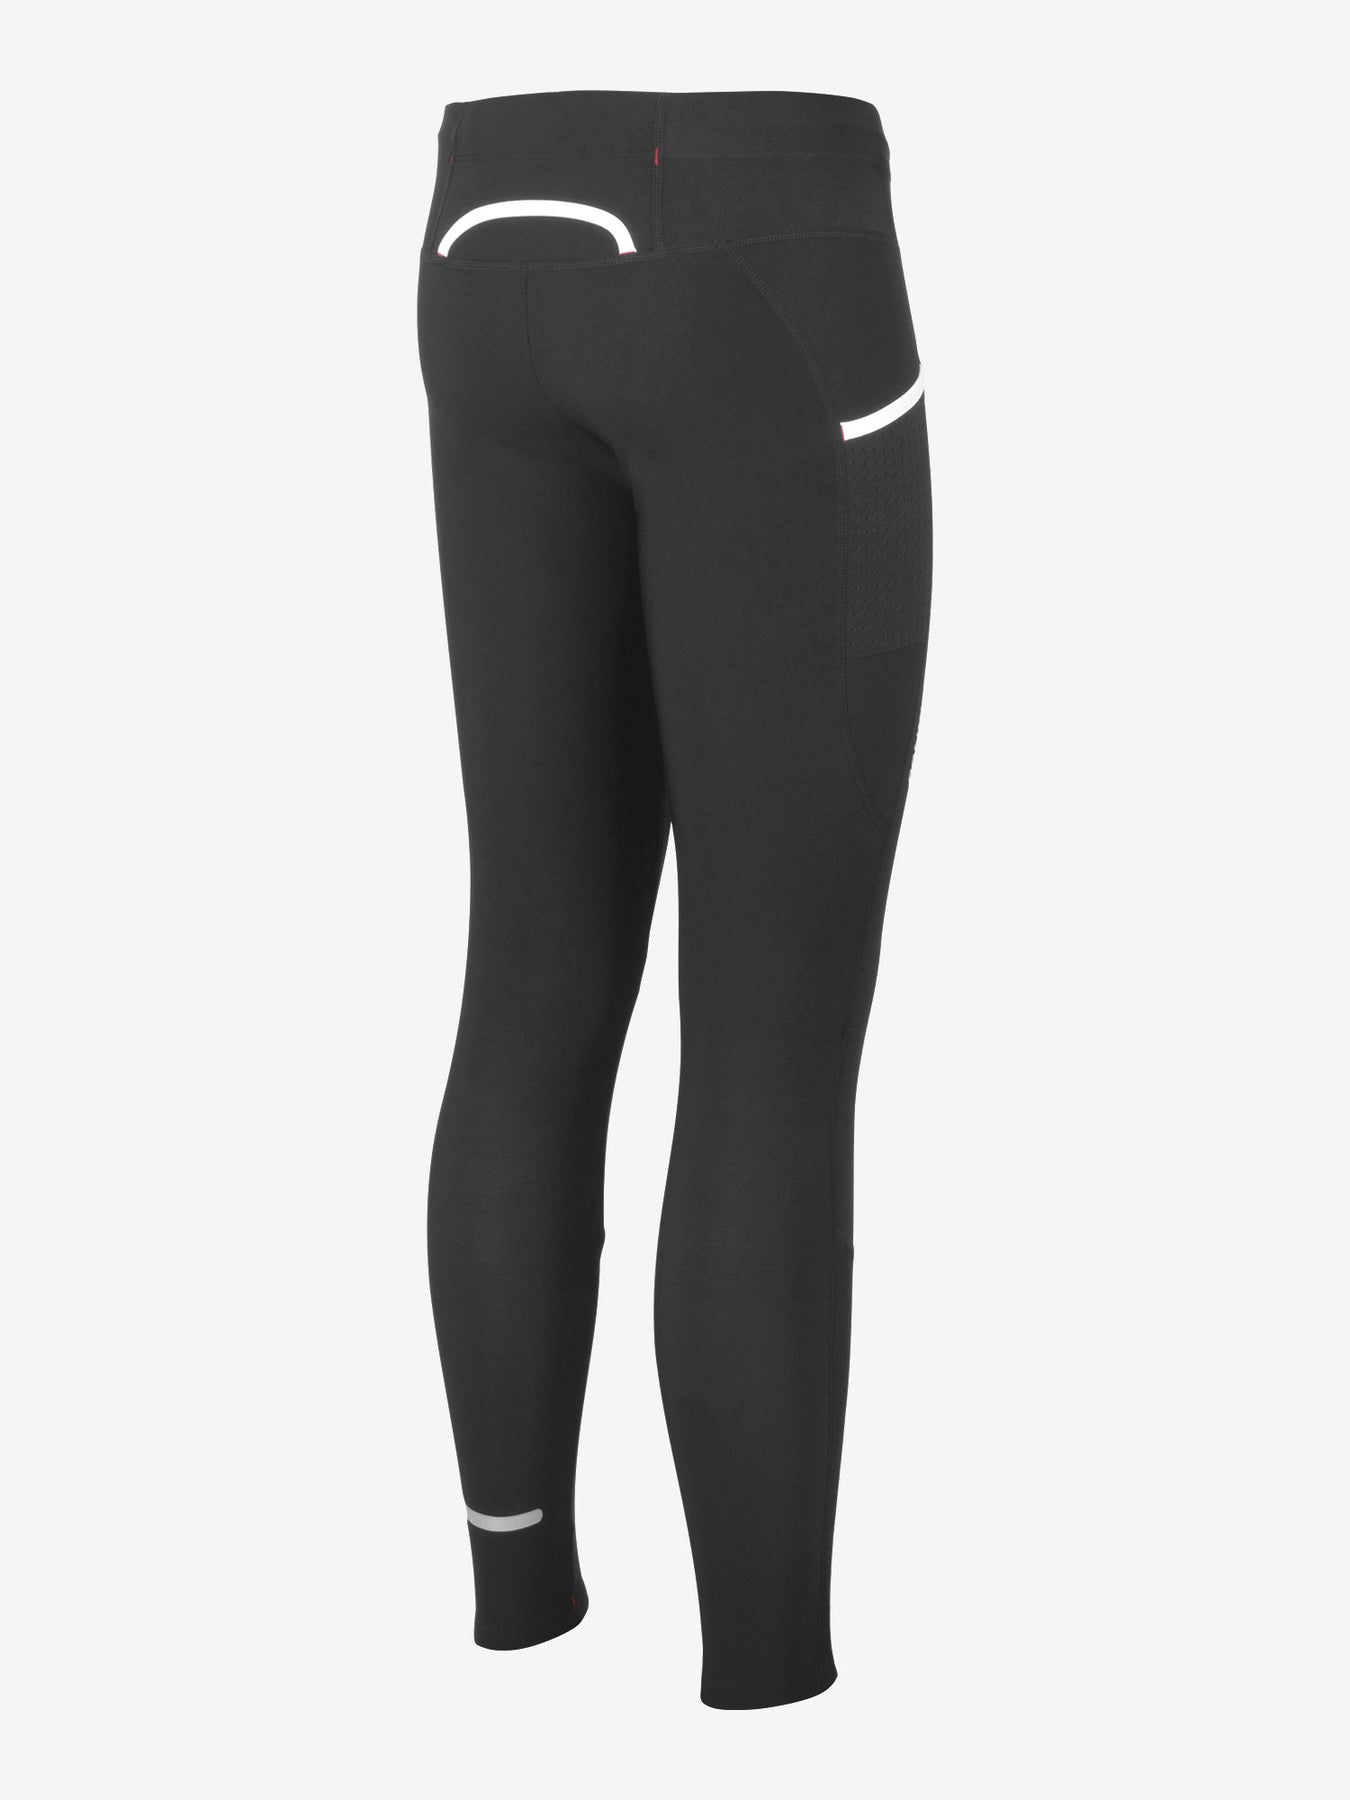 FUSION Womens Hot Long Fleece lined Training Tights - FM Sports